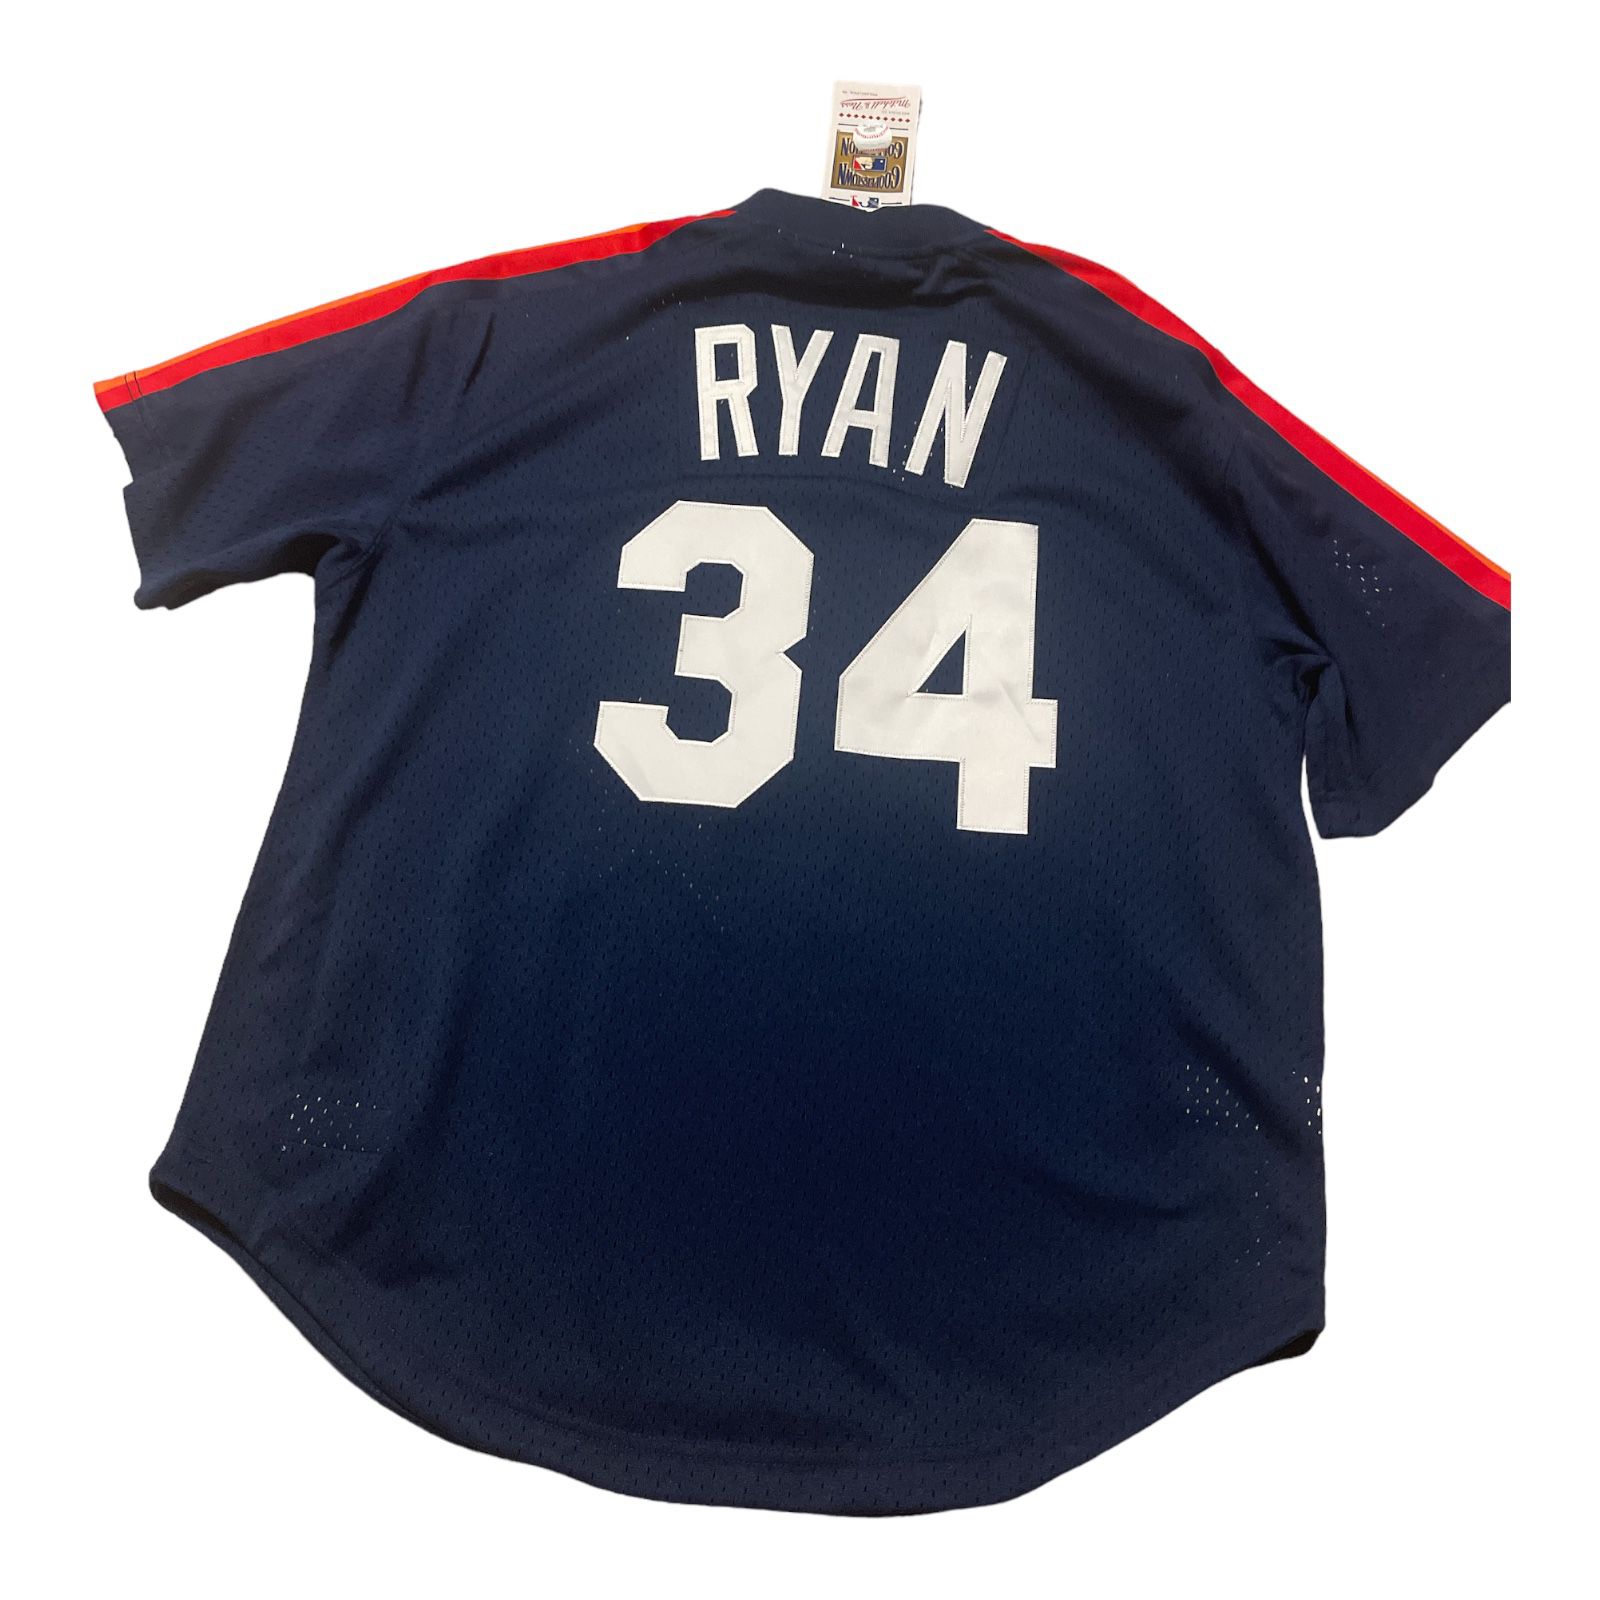 Nolan Ryan Mitchell And Ness Jersey for Sale in Brooklyn, NY - OfferUp